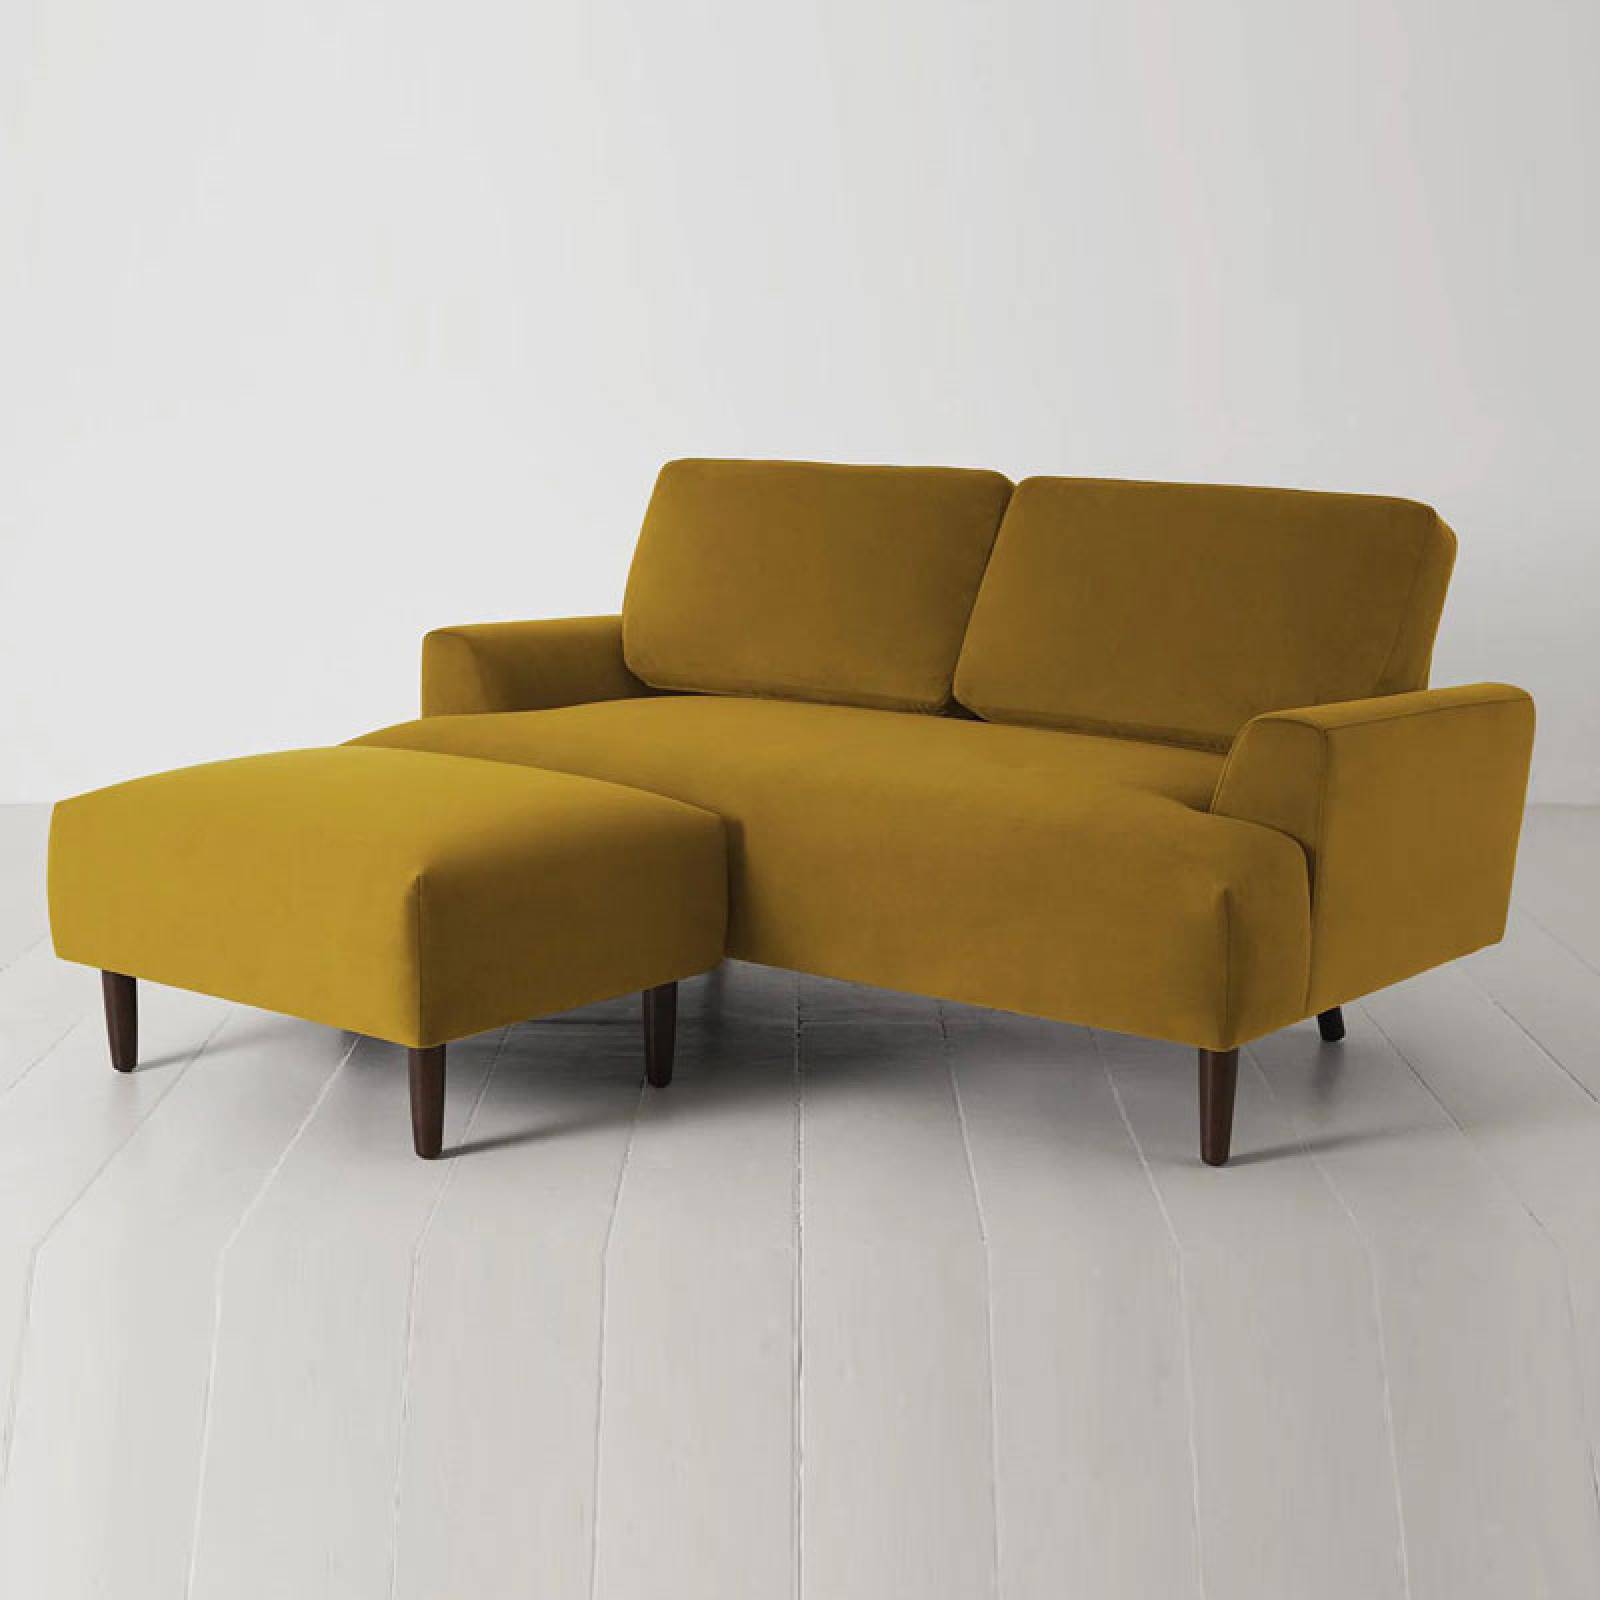 Swyft - Model 05 - 2 Seater Chaise Sofa - Left or Right thumbnails